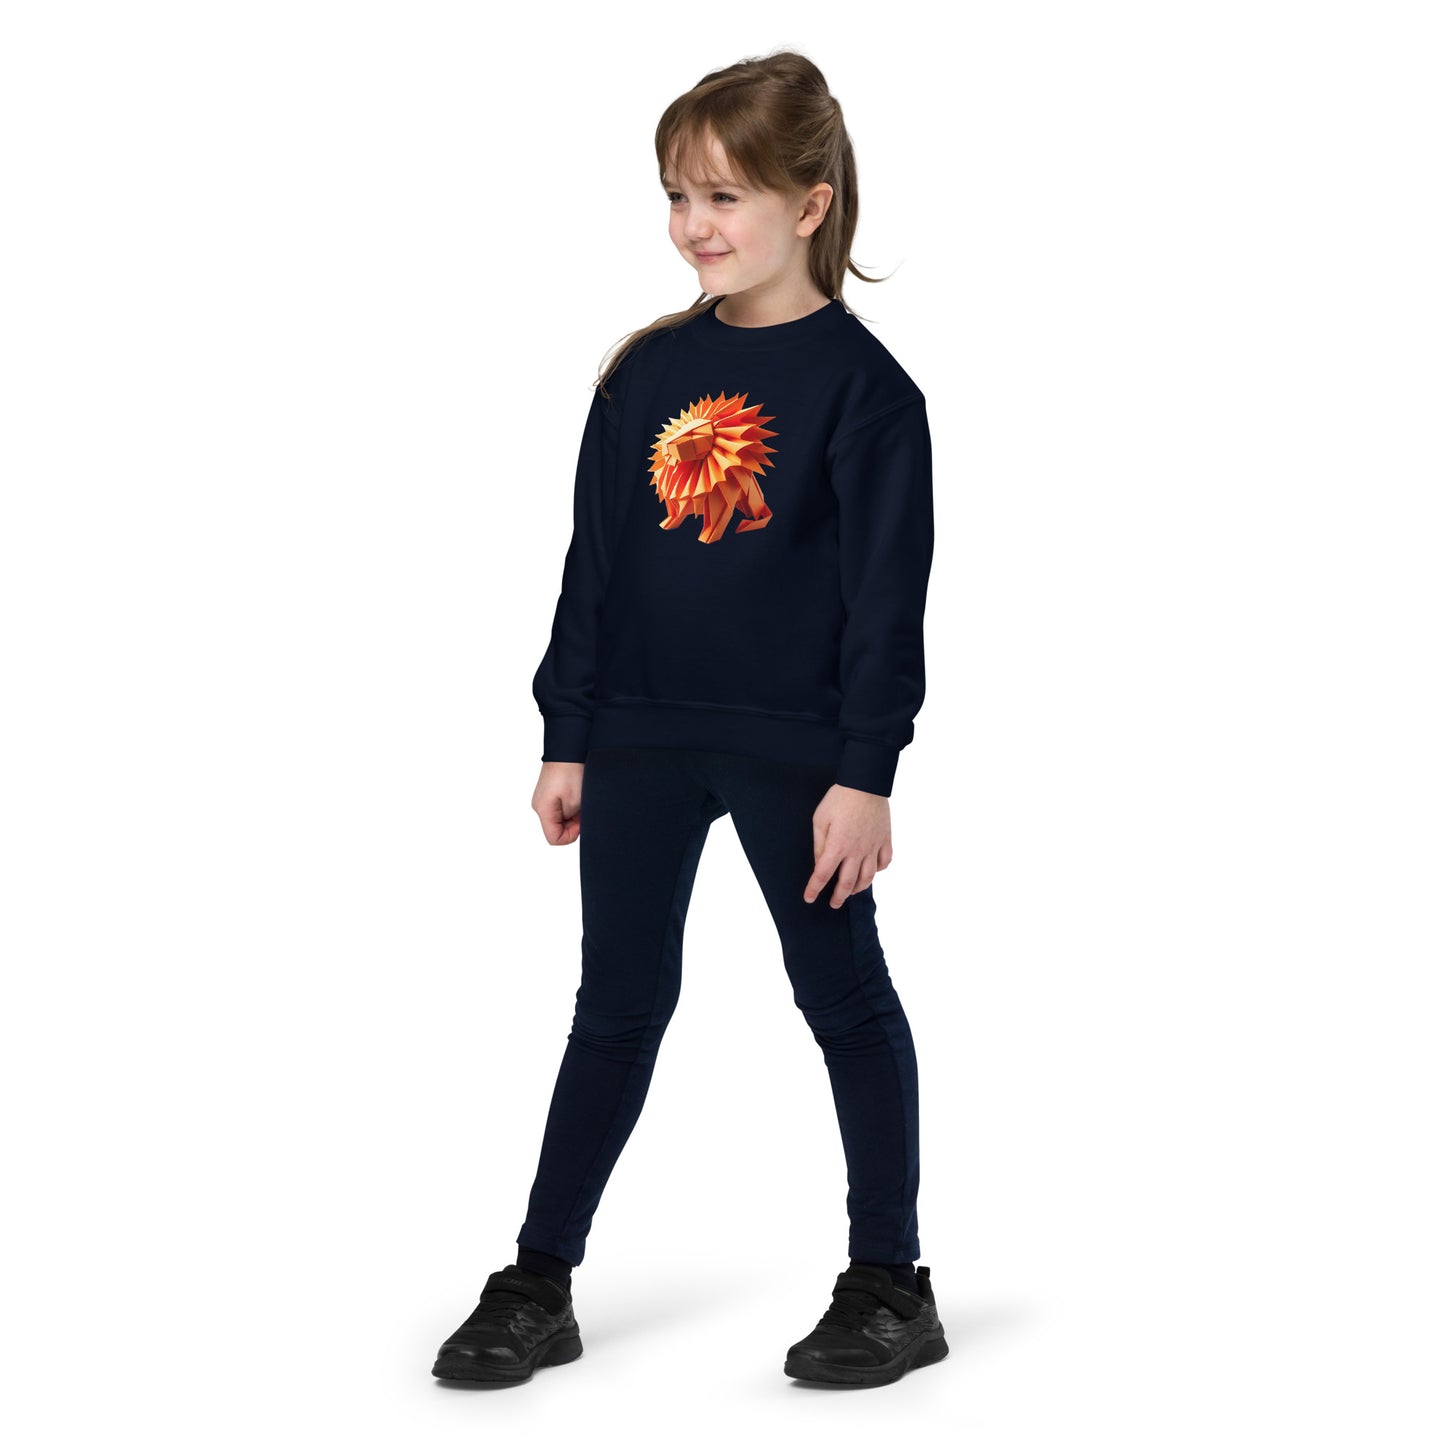 Youth with navy sweater with print of a lion